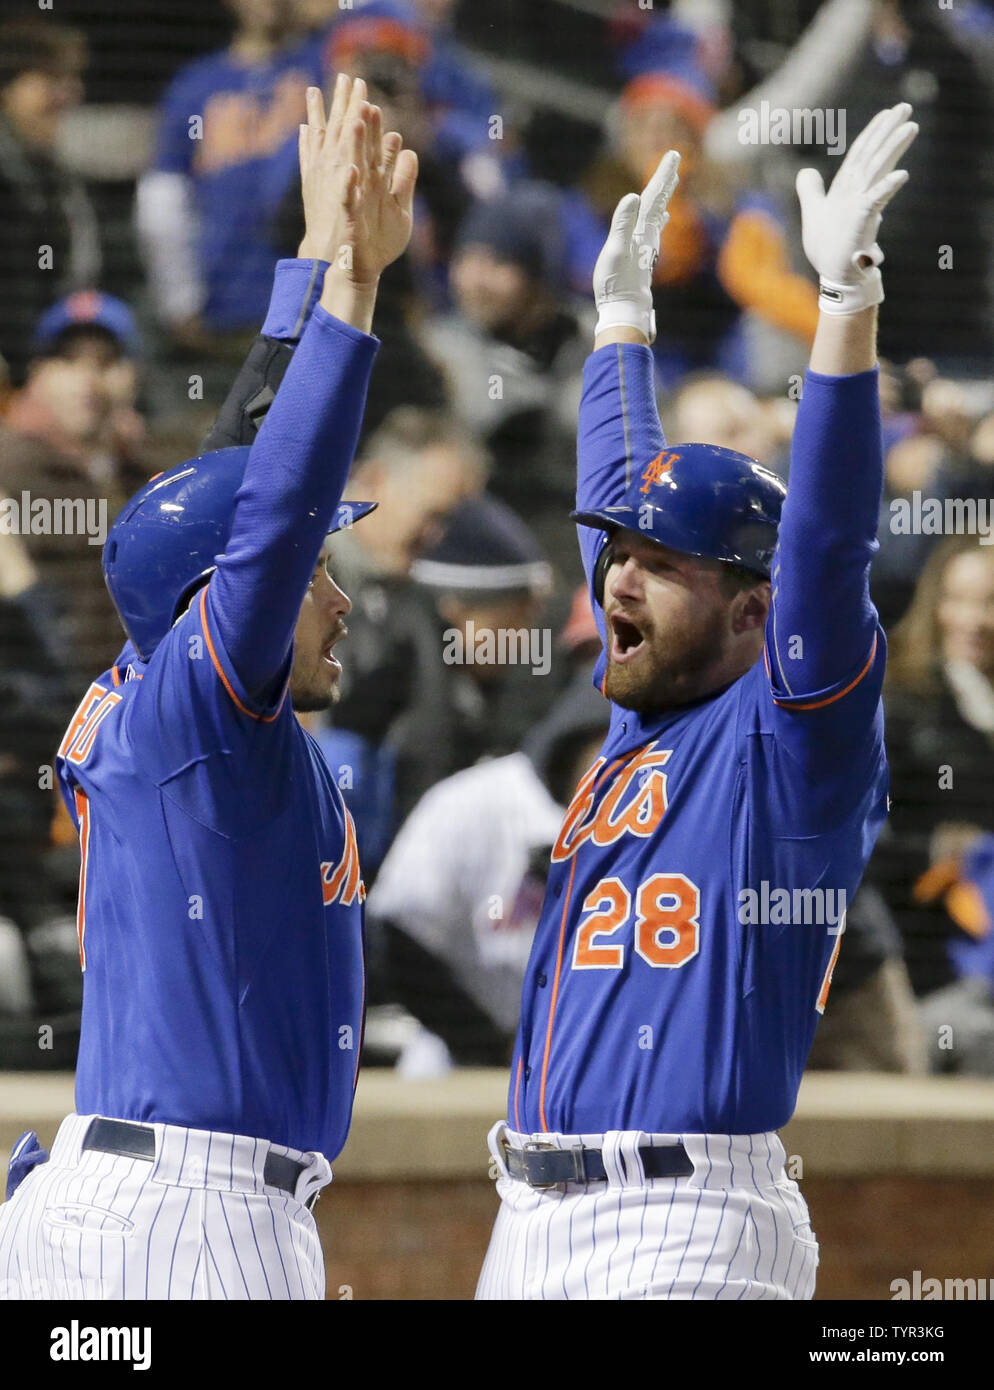 New York Mets batter Daniel Murphy (28) celebrates with on-deck batter Travis d'Arnaud at the dugout steps after he hit a solo home run against the Chicago Cubs in the first inning inning of game 1 of the NLCS at Citi Field in New York City on October 17, 2015.    Photo by Ray Stubblebine/UPI Stock Photo